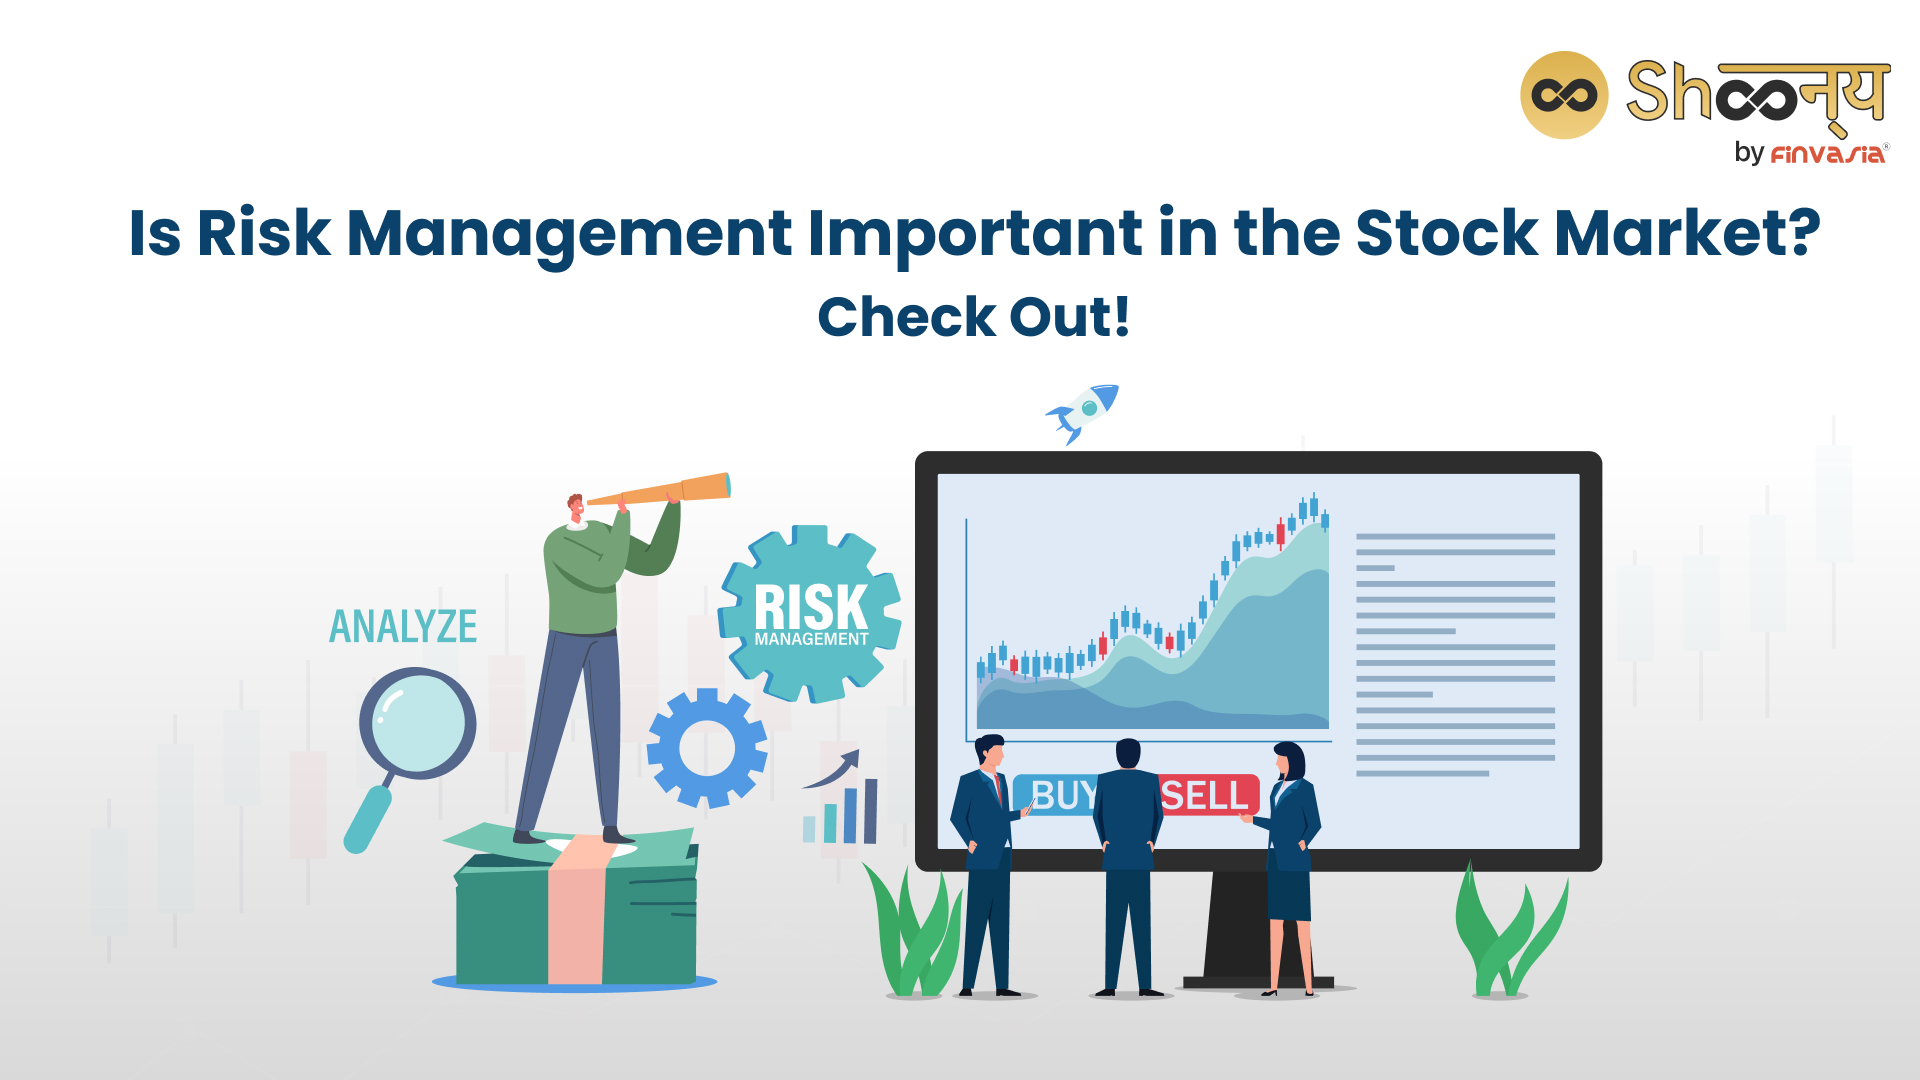 What is Risk Management in the Stock Market